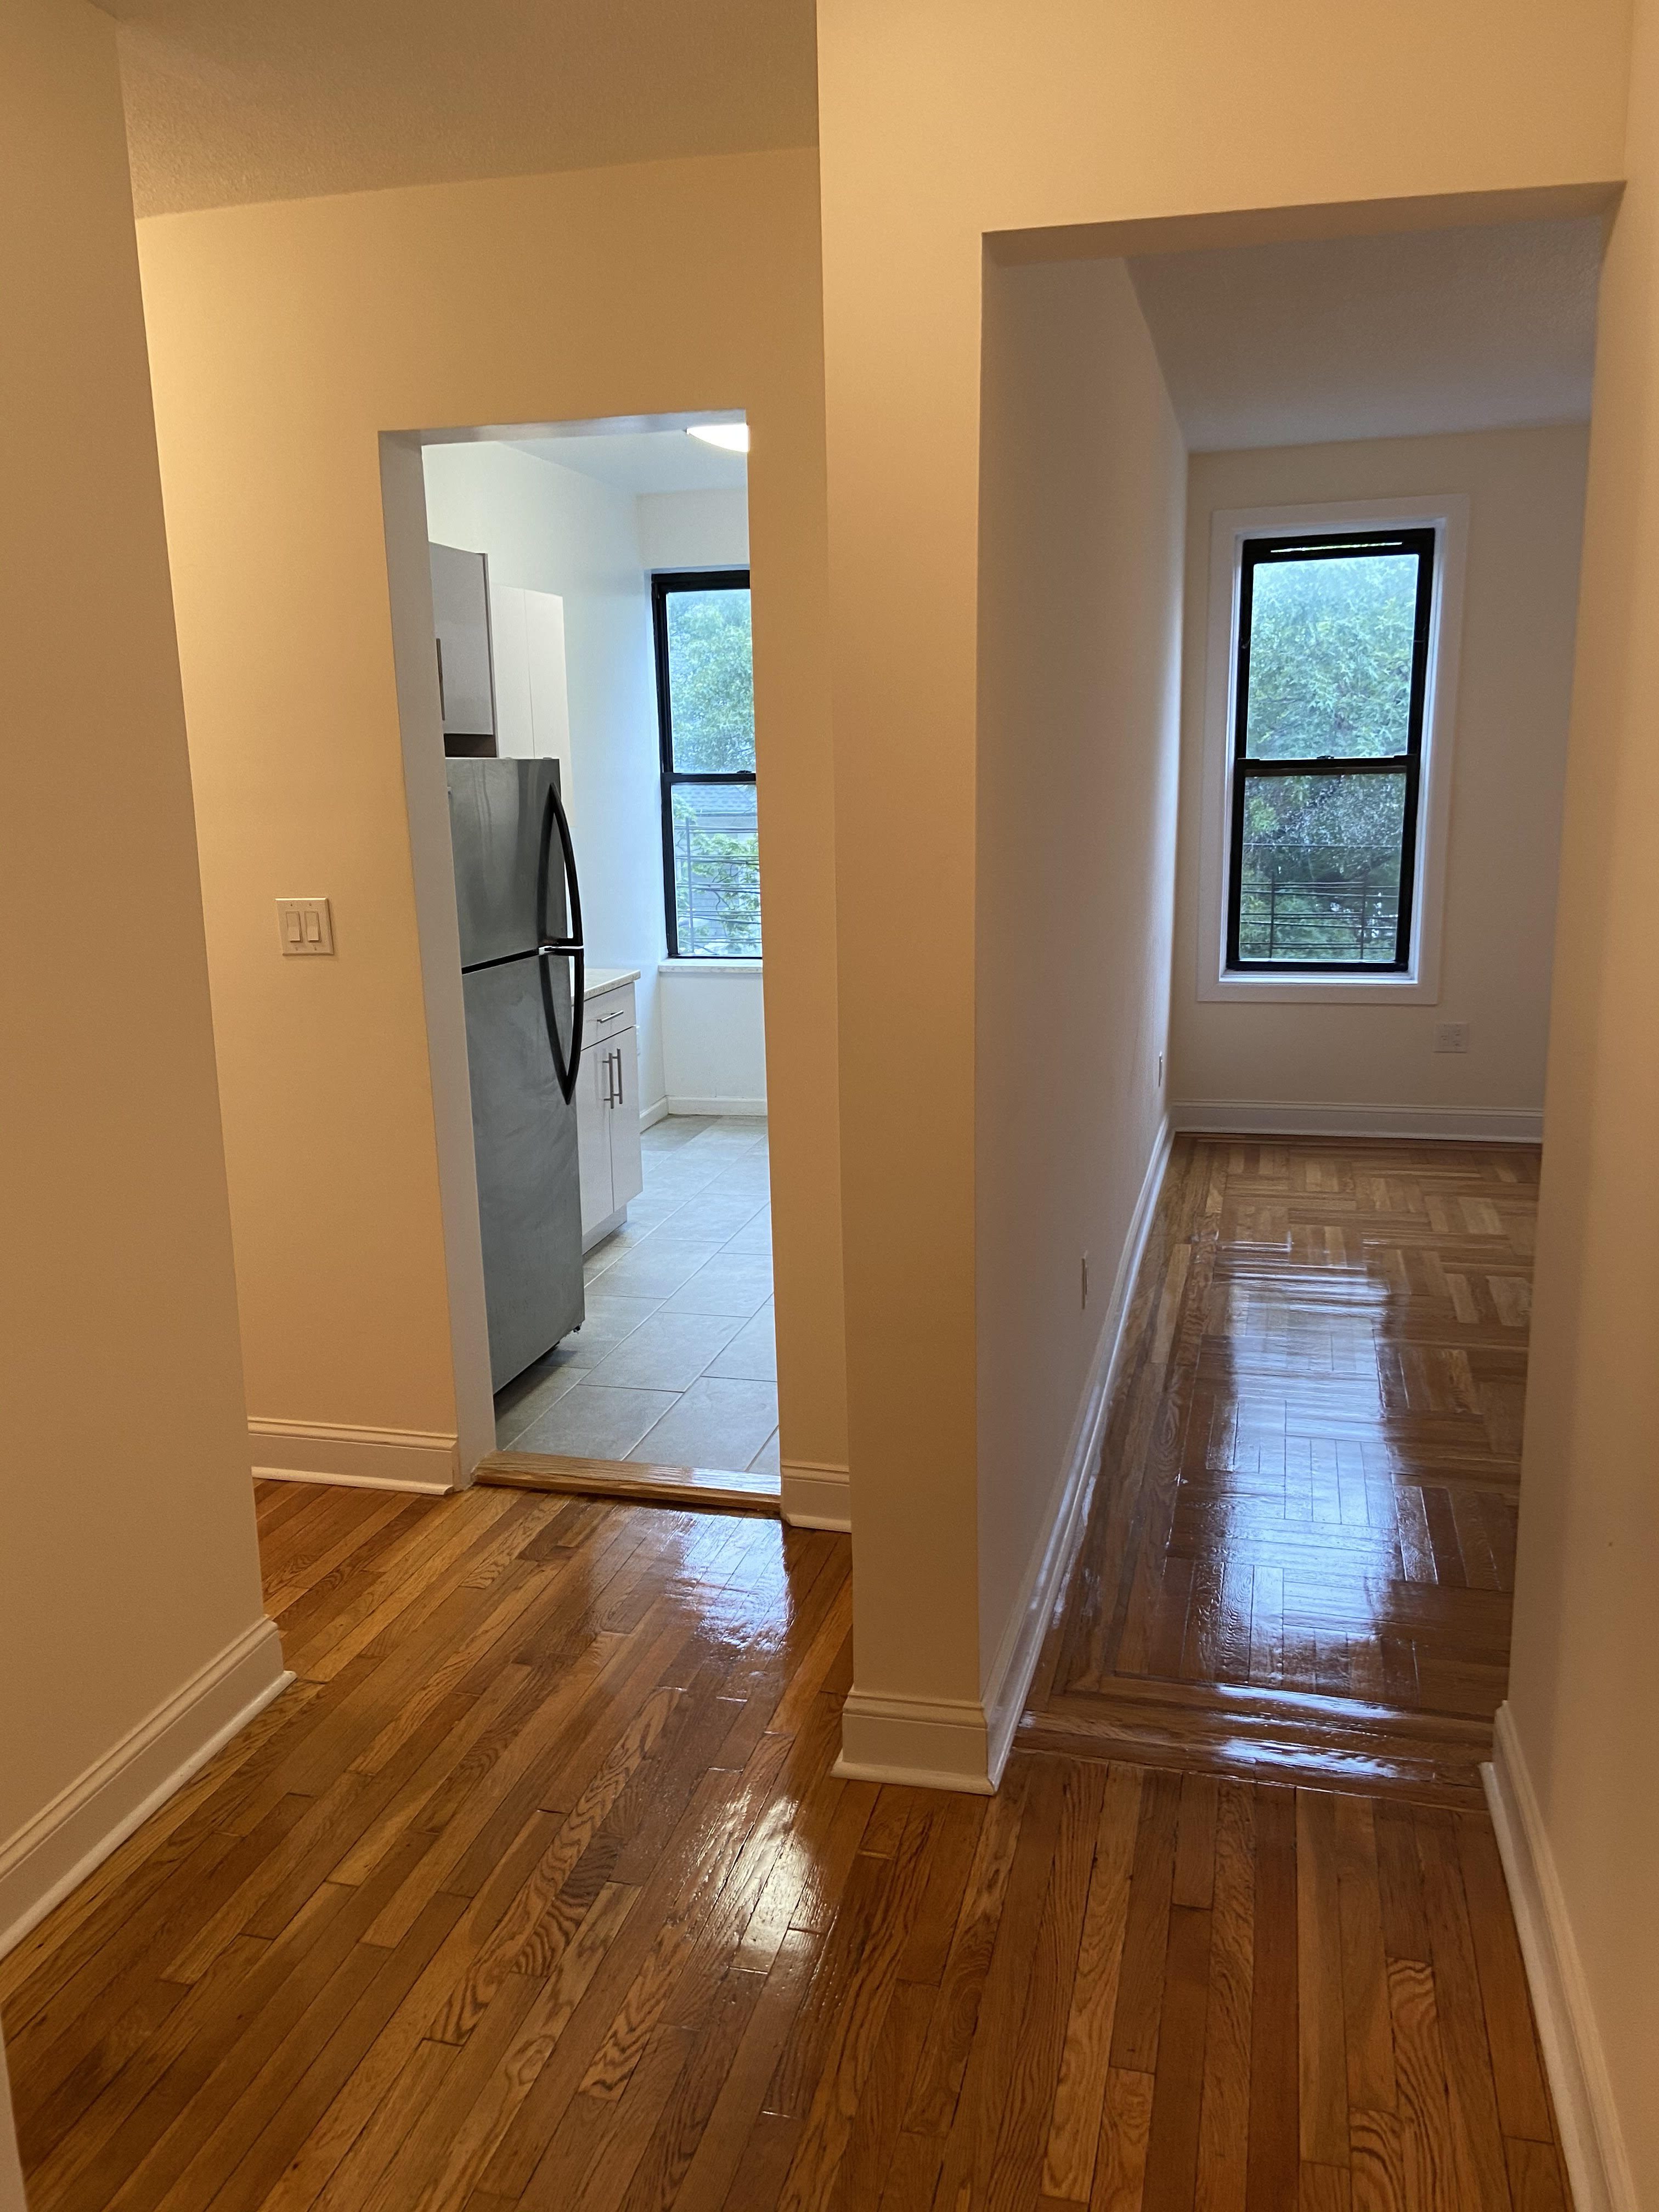 Apartment For Rent in Richmond Hill, Queens, NY 11418 Web ID RD3765